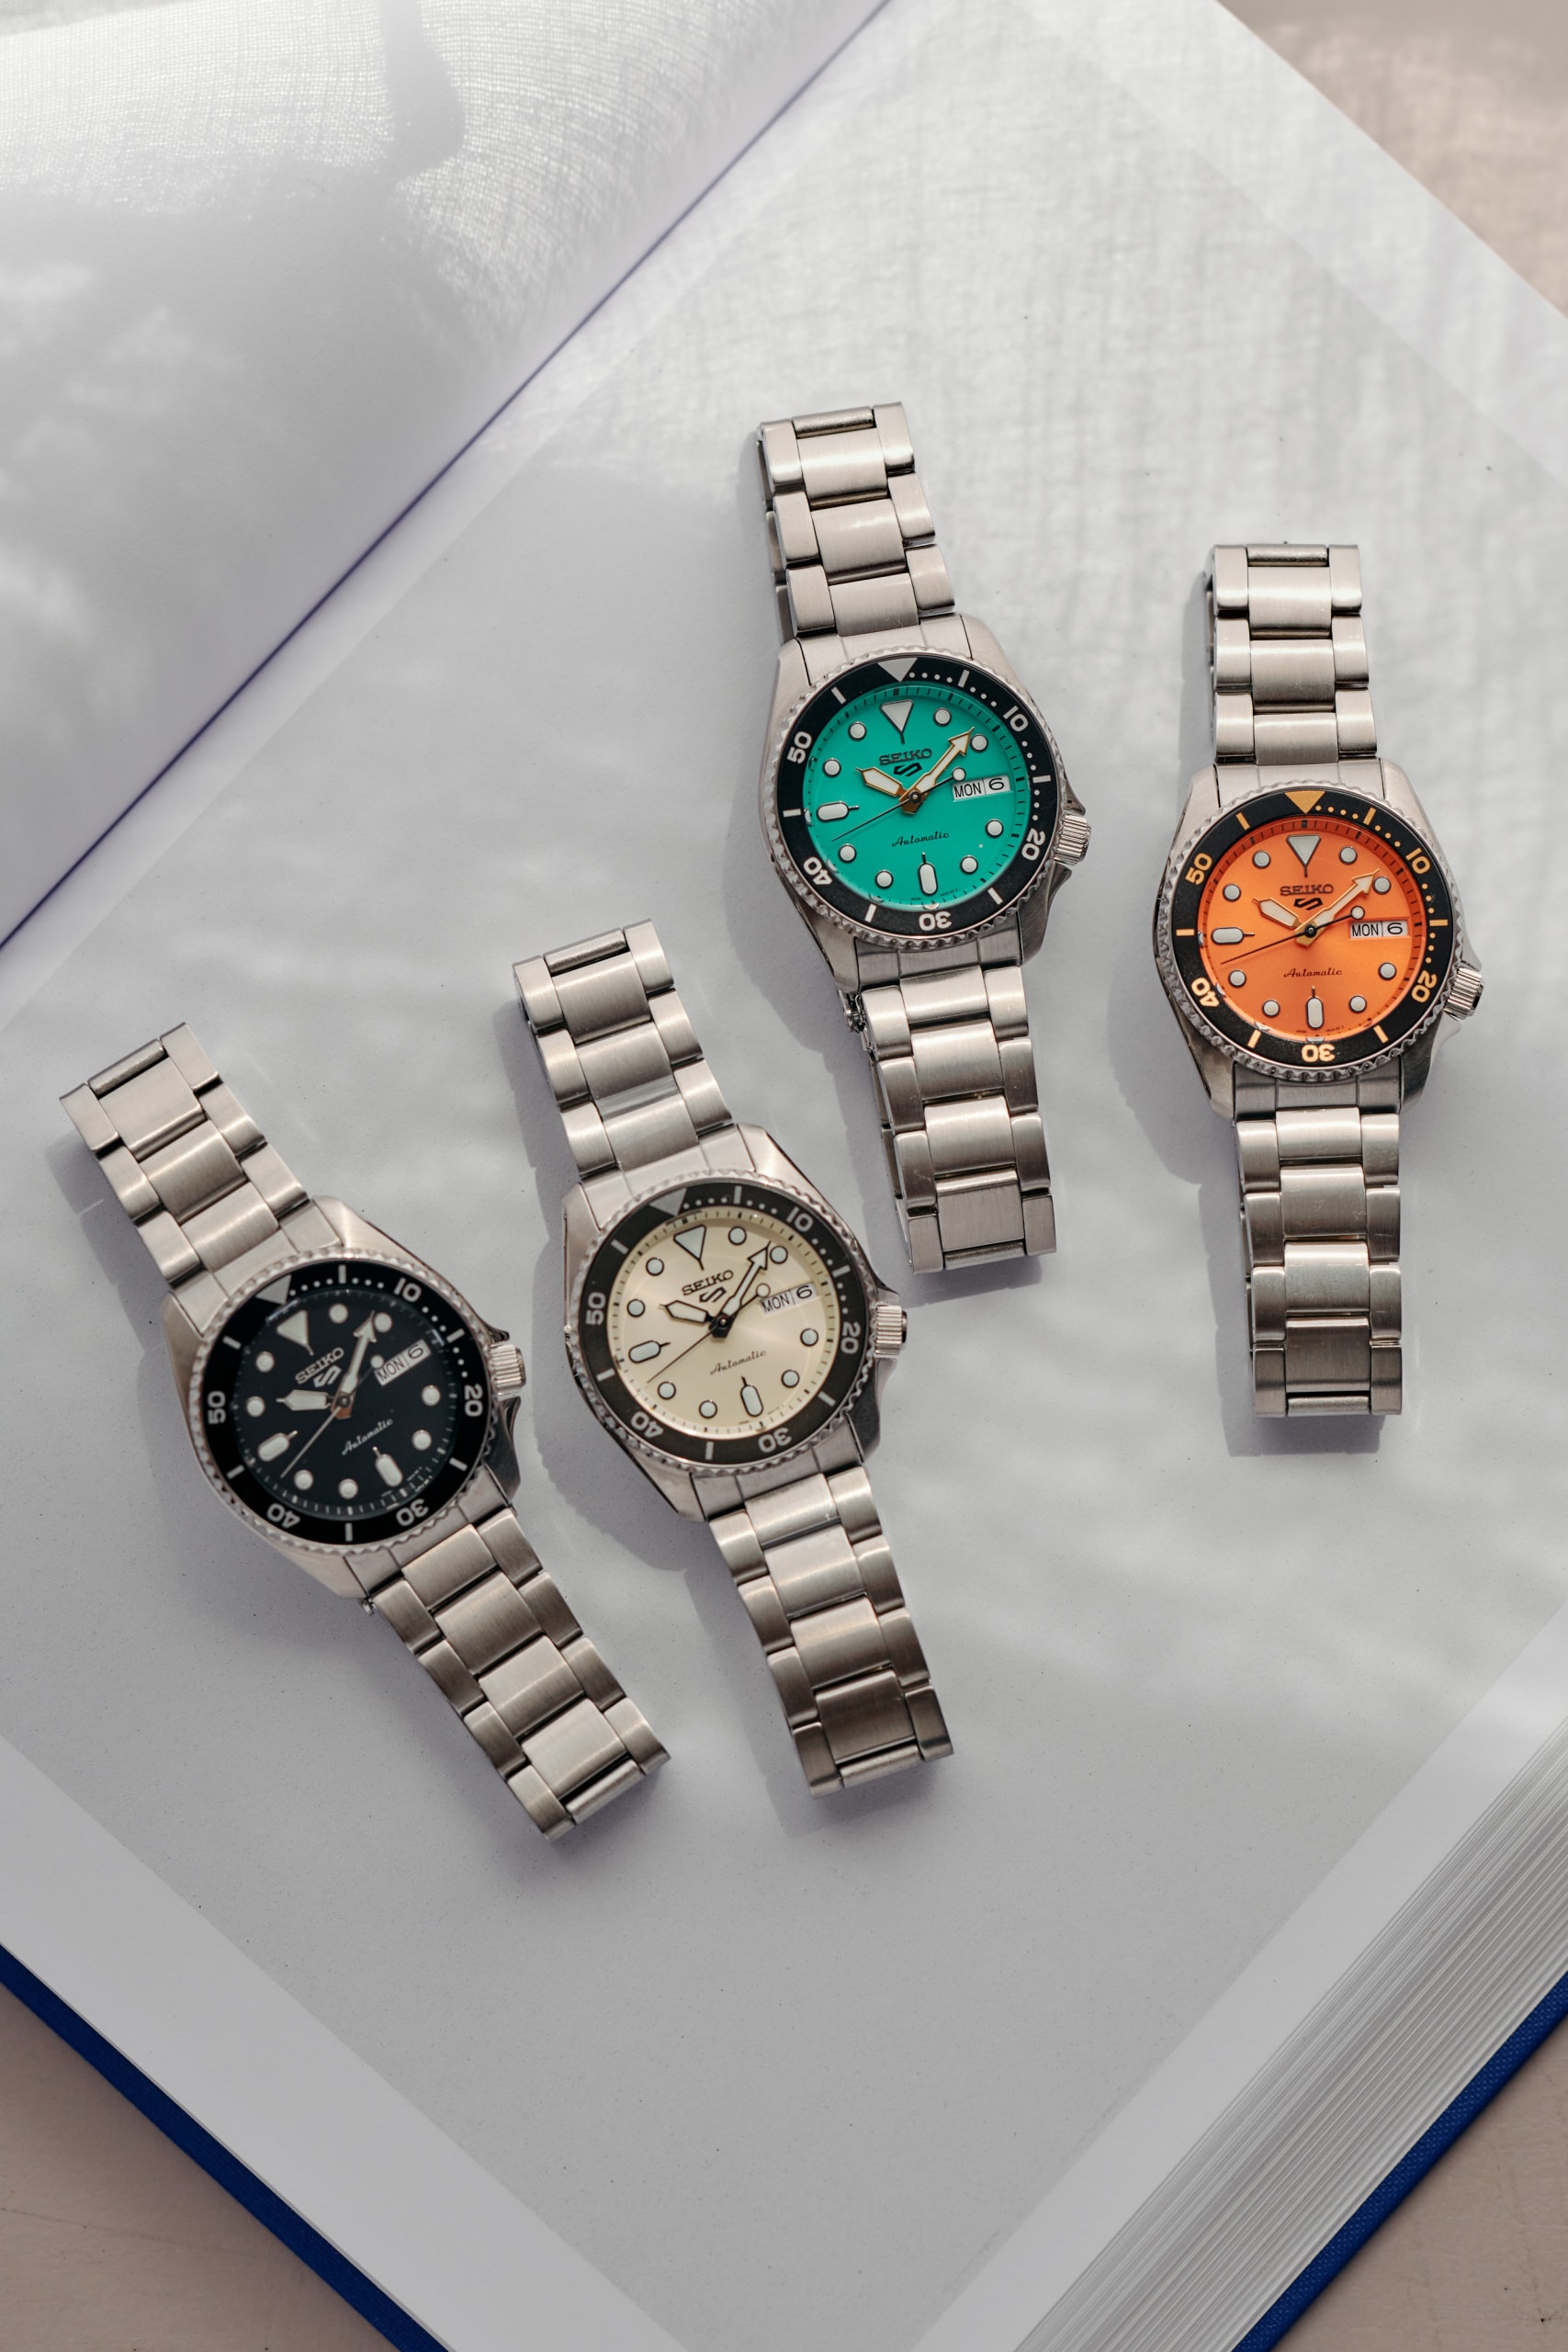 Seiko Expands 5 Sports Watch Line With Mid-Size Model SKX Japanese timepiece steel bracelet orange champagne black teal